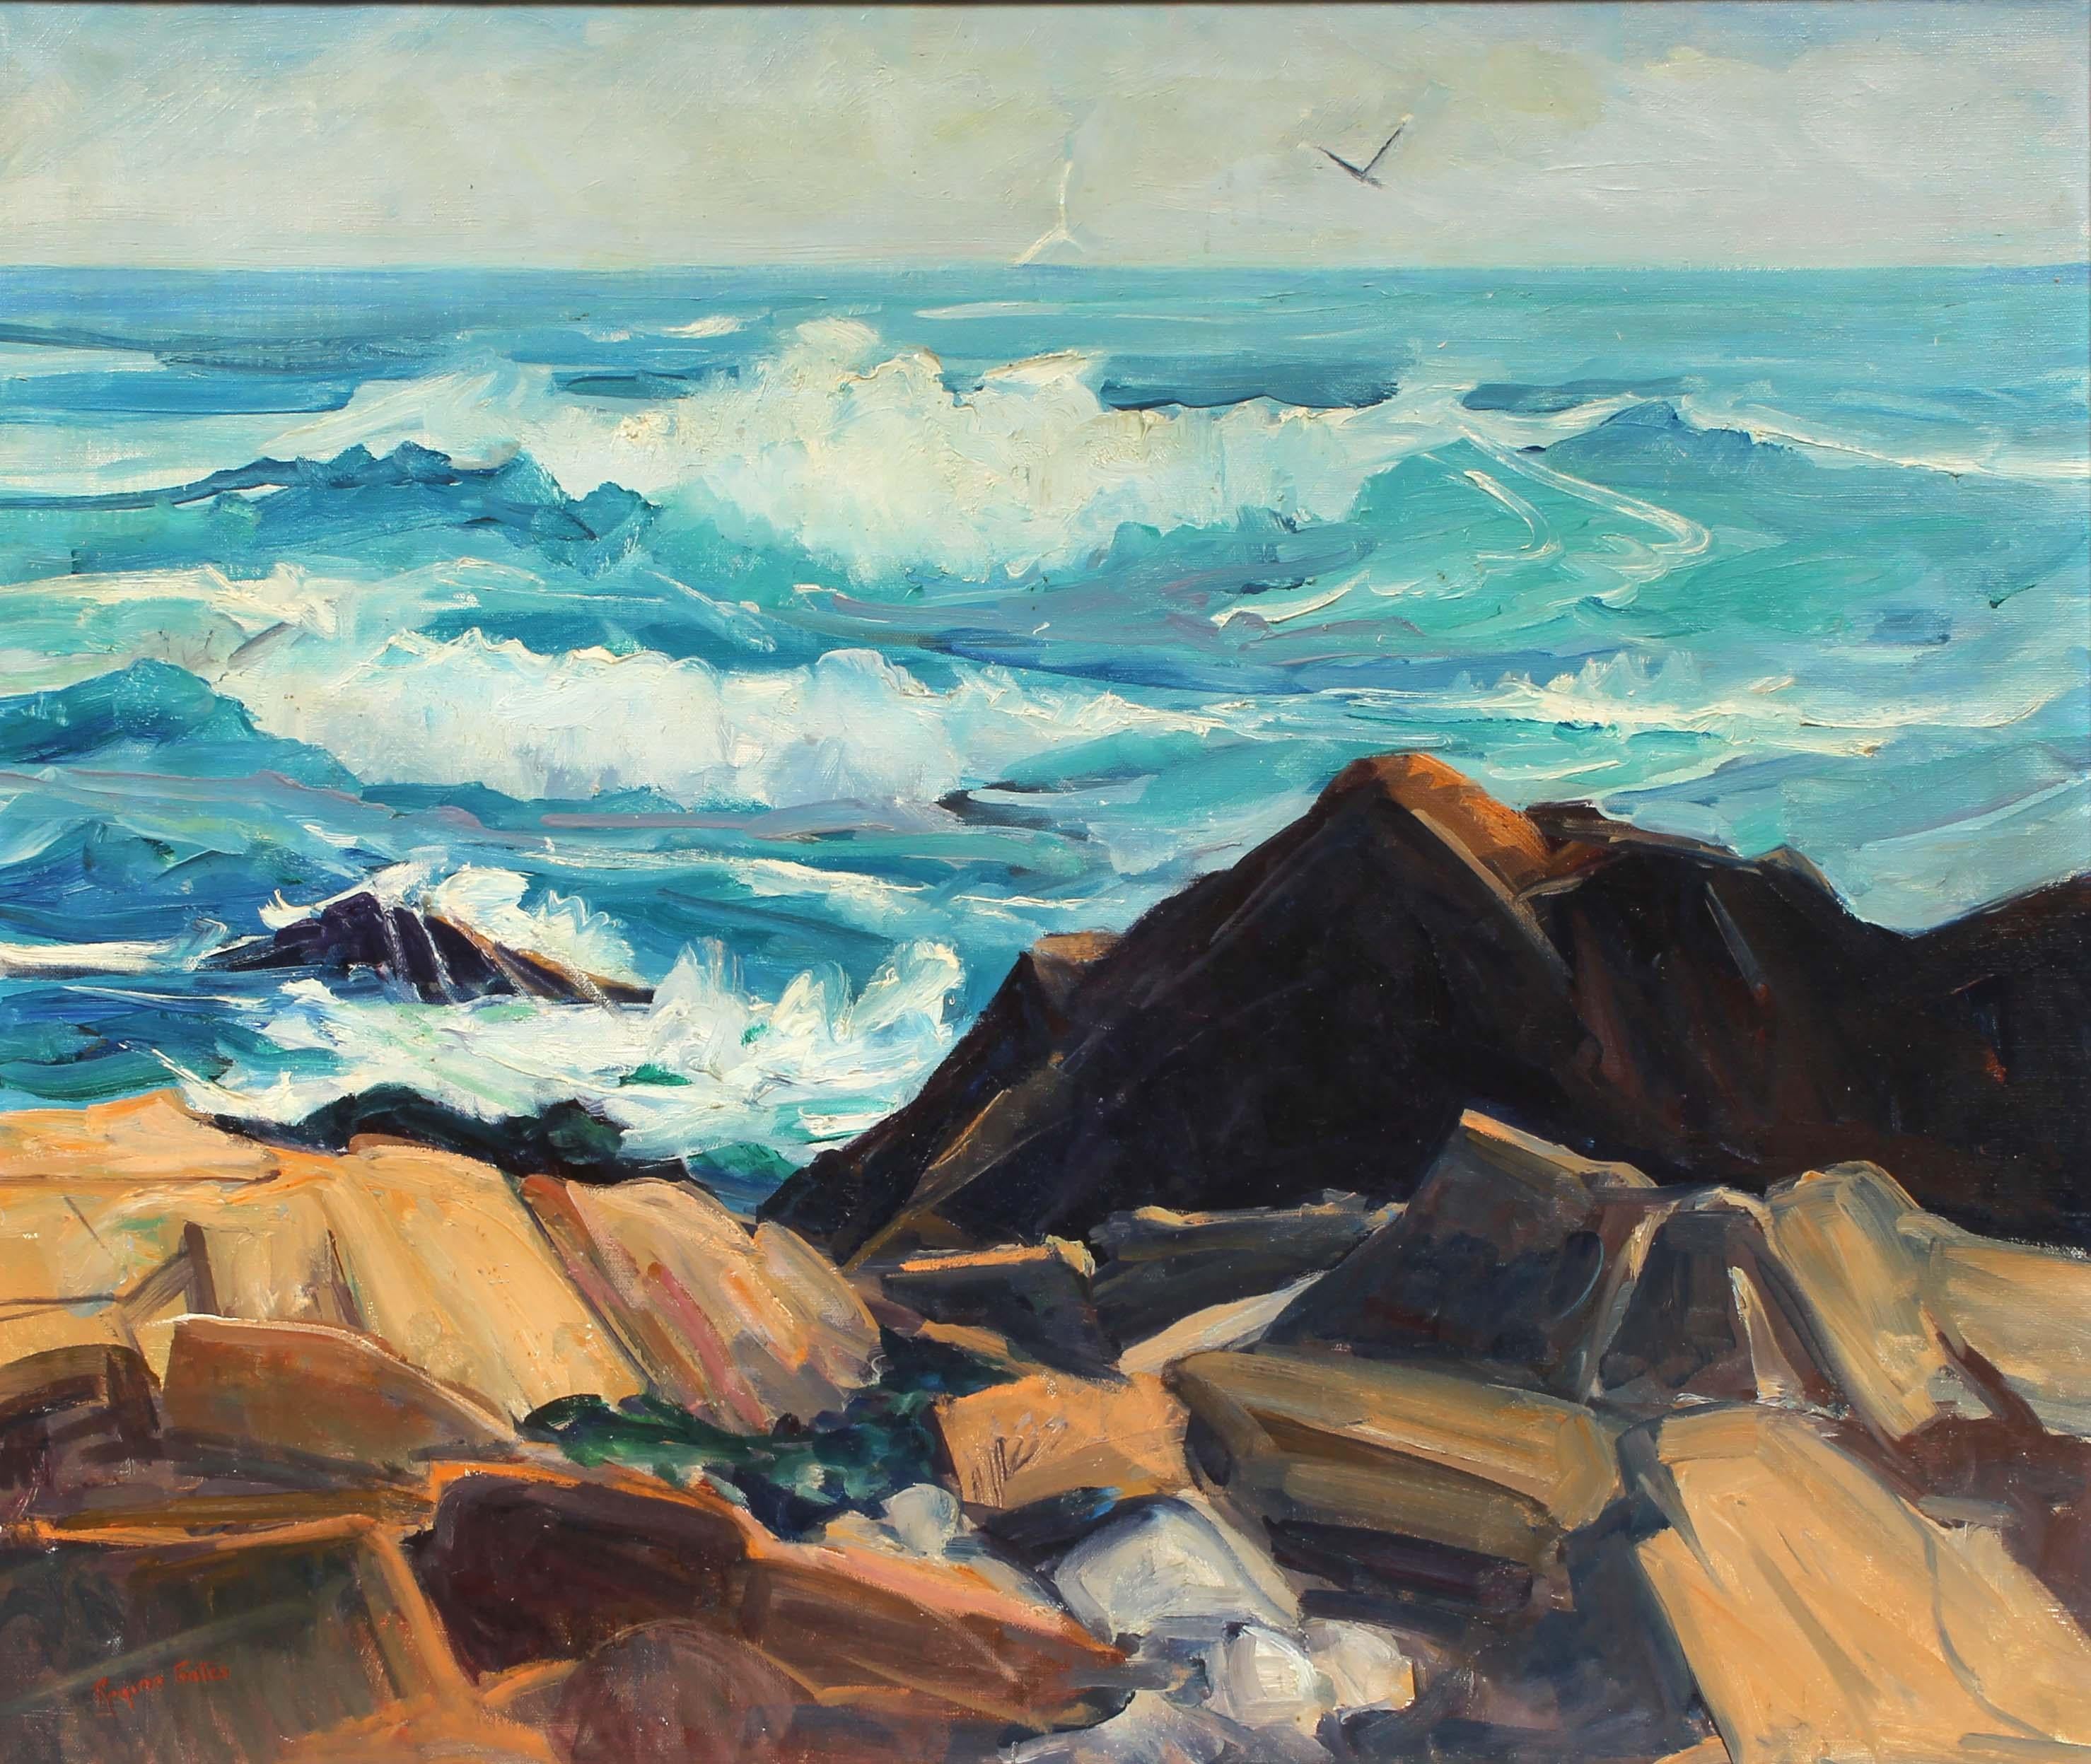 Listed vintage oil painting of rolling waves in Gloucester, MA. This work was created by listed female artist Regina Gates.

Regina Martin Gates was born in 1896 in Watervliet, Albany County, New York.  She graduated from Watervliet public schools